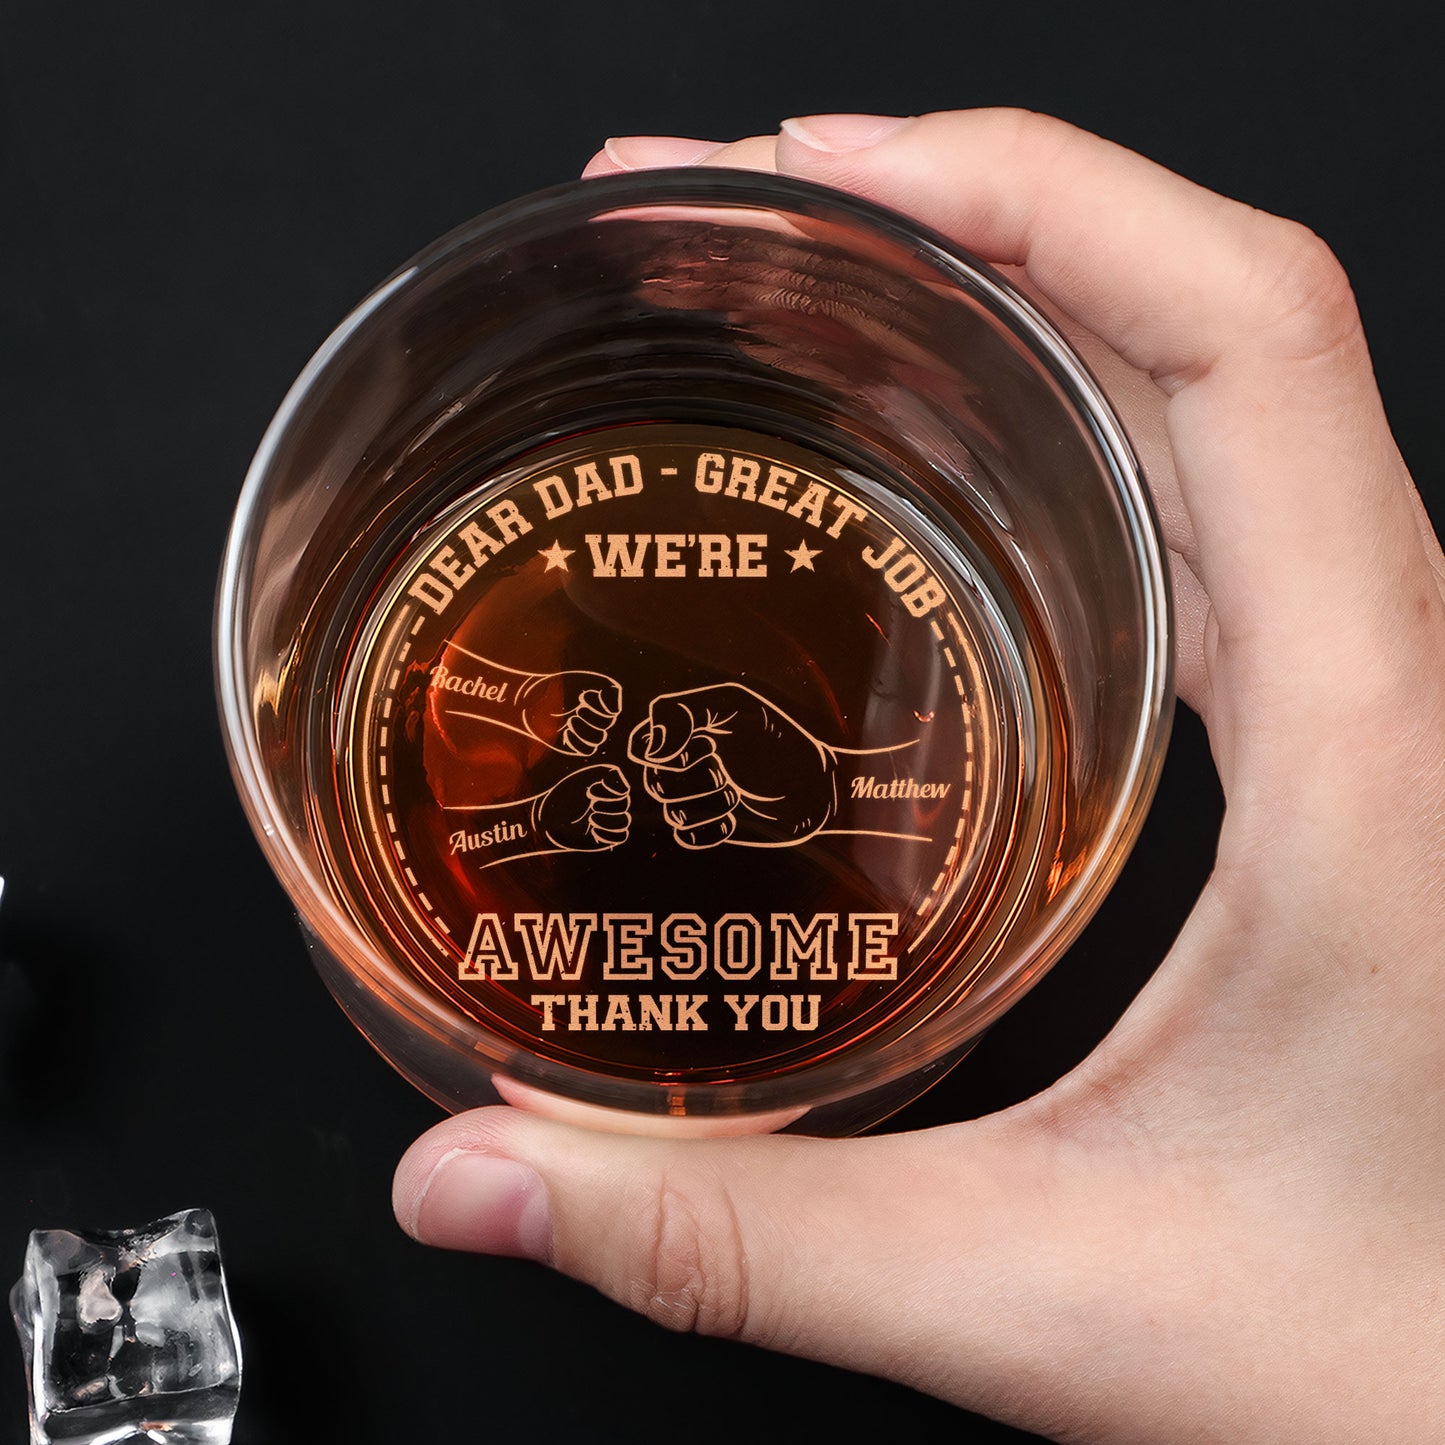 Dear Dad Great Job We're Awesome - Personalized Engraved Whiskey Glass